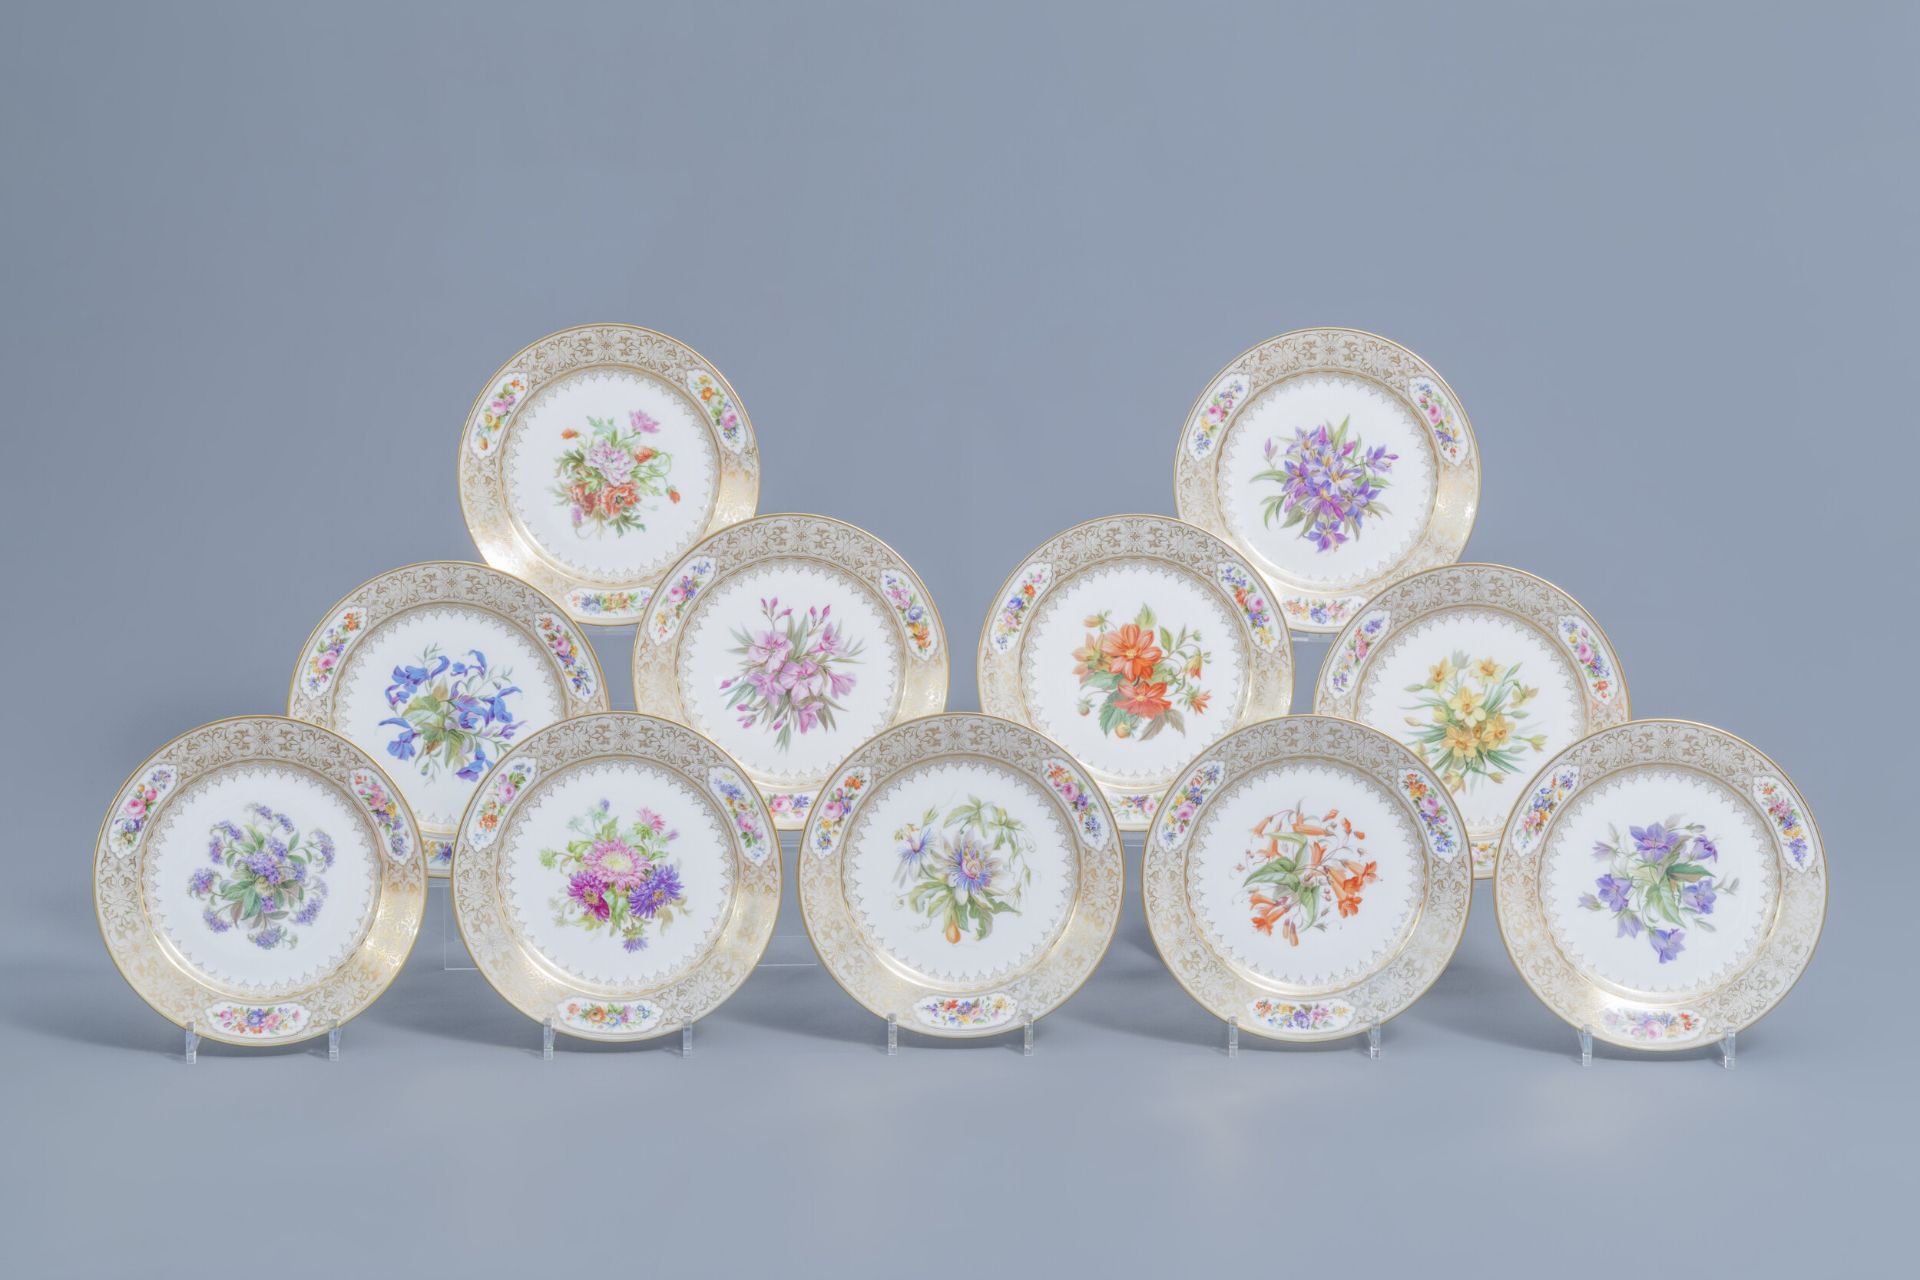 A set of eleven French plates with gilt and polychrome floral design, Svres mark, 19th C. - Image 2 of 22